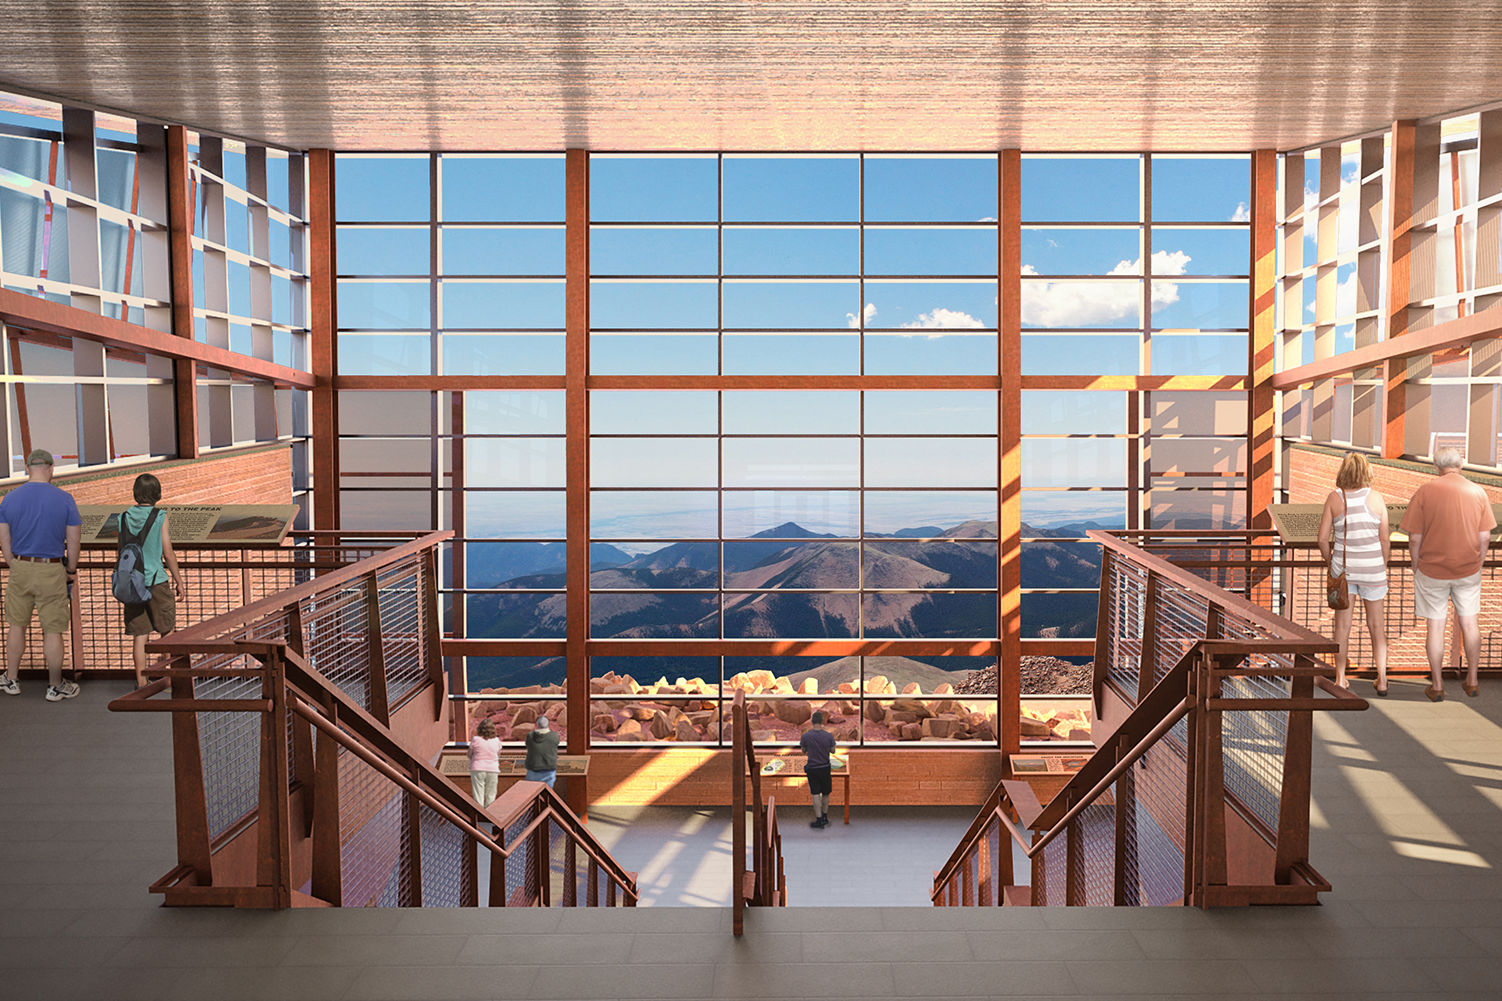 The boundless sky and perfectly framed views of Mt. Rosa draw visitors to the main floor of the Pikes Peak Visitor Center where they can access exhibits, dining, a gift shop, and restrooms.